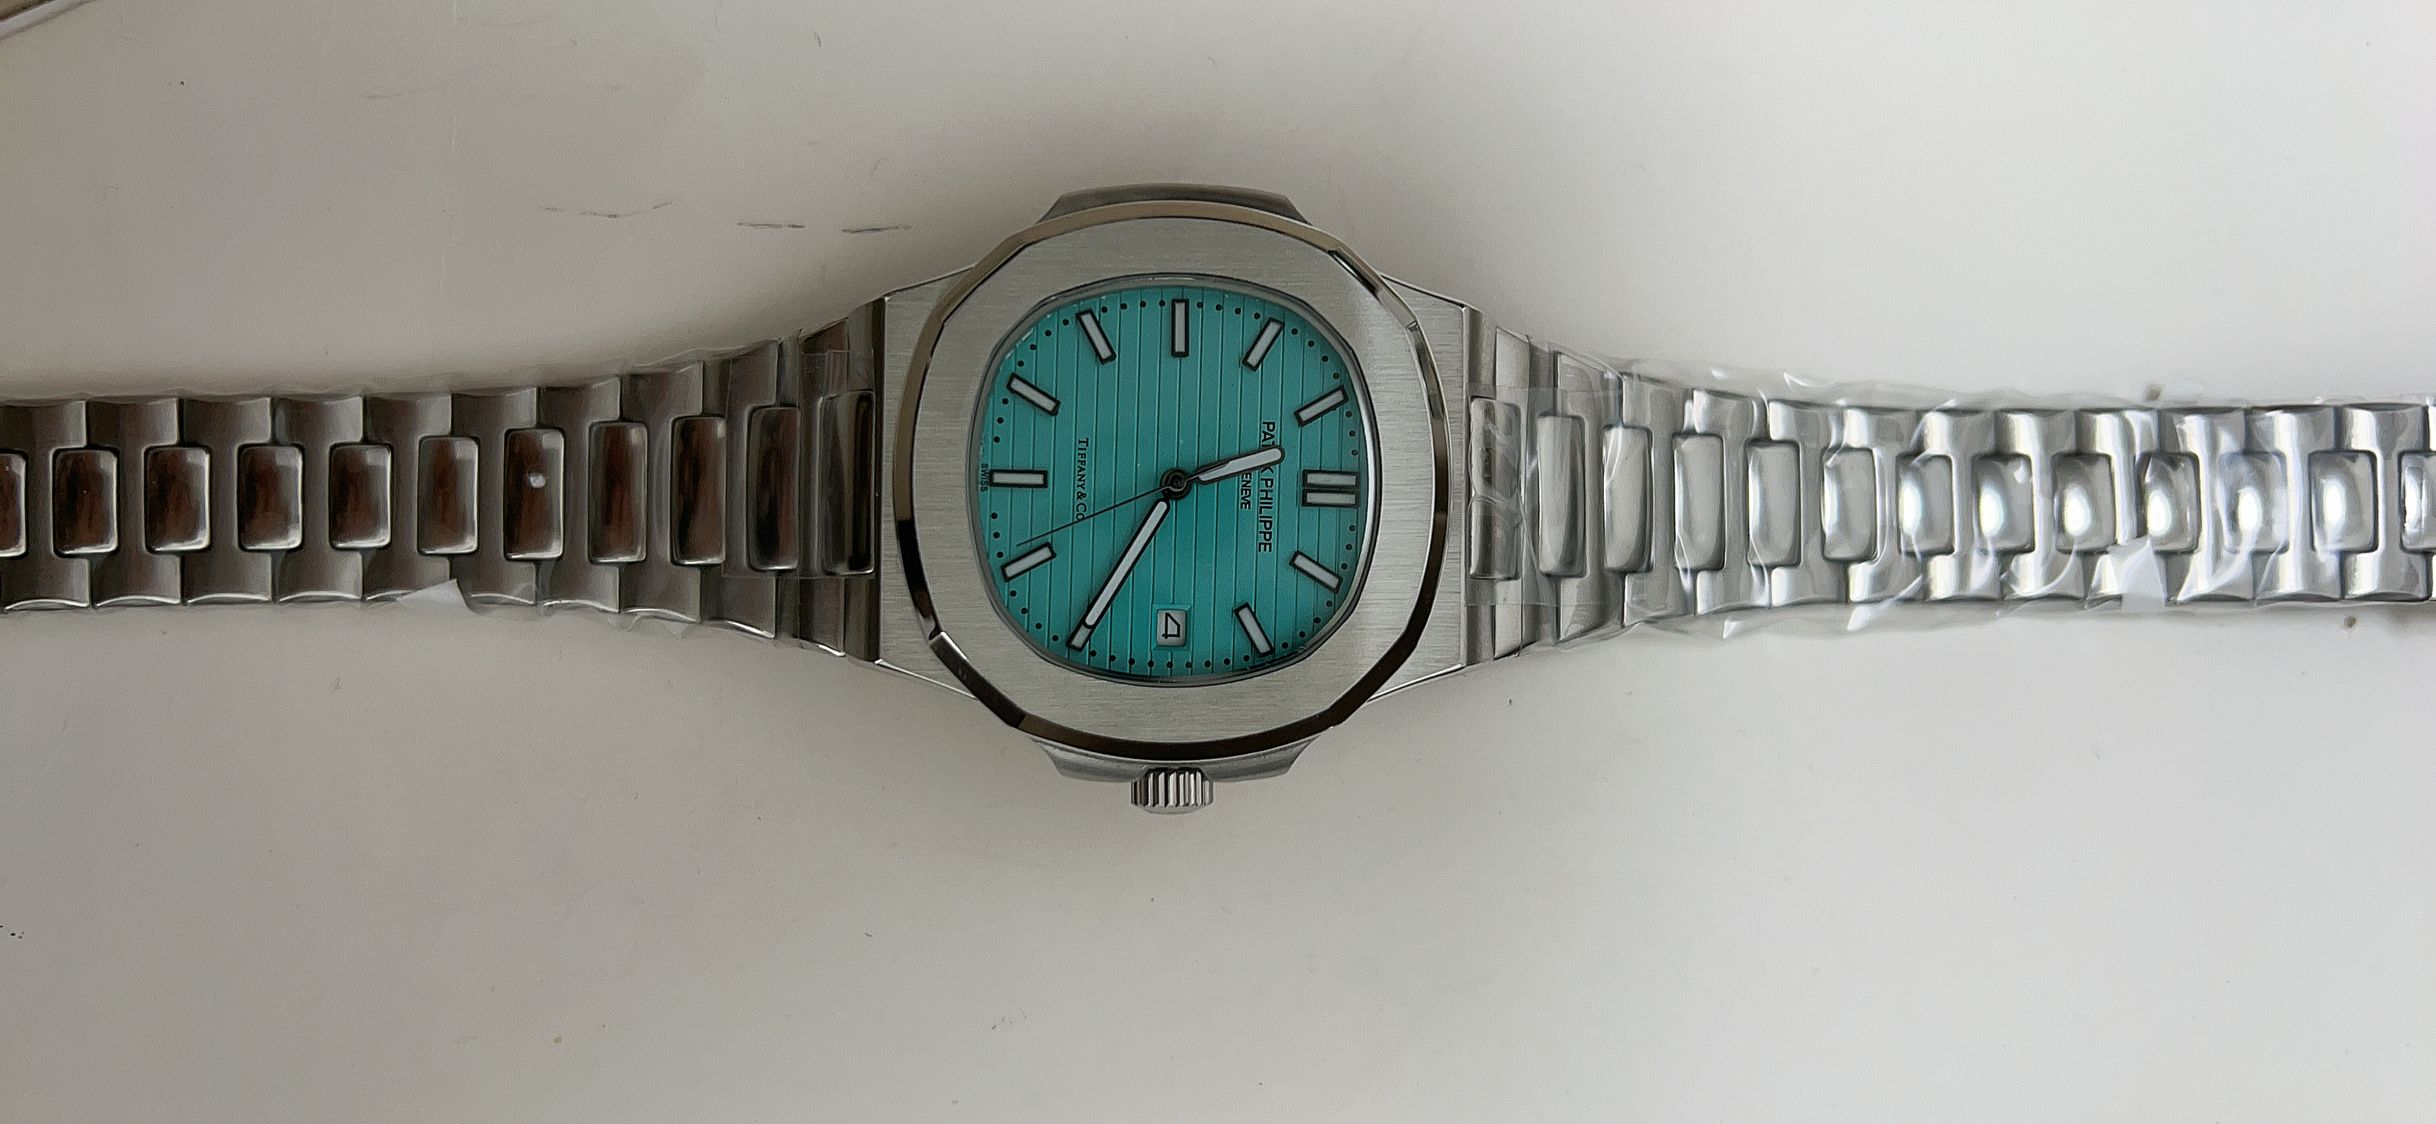 Patek Philippe 5711/1A-018 Tiffany Blue Dial  UK Replica - 1:1 best  edition replica watches store, high quality fake watches